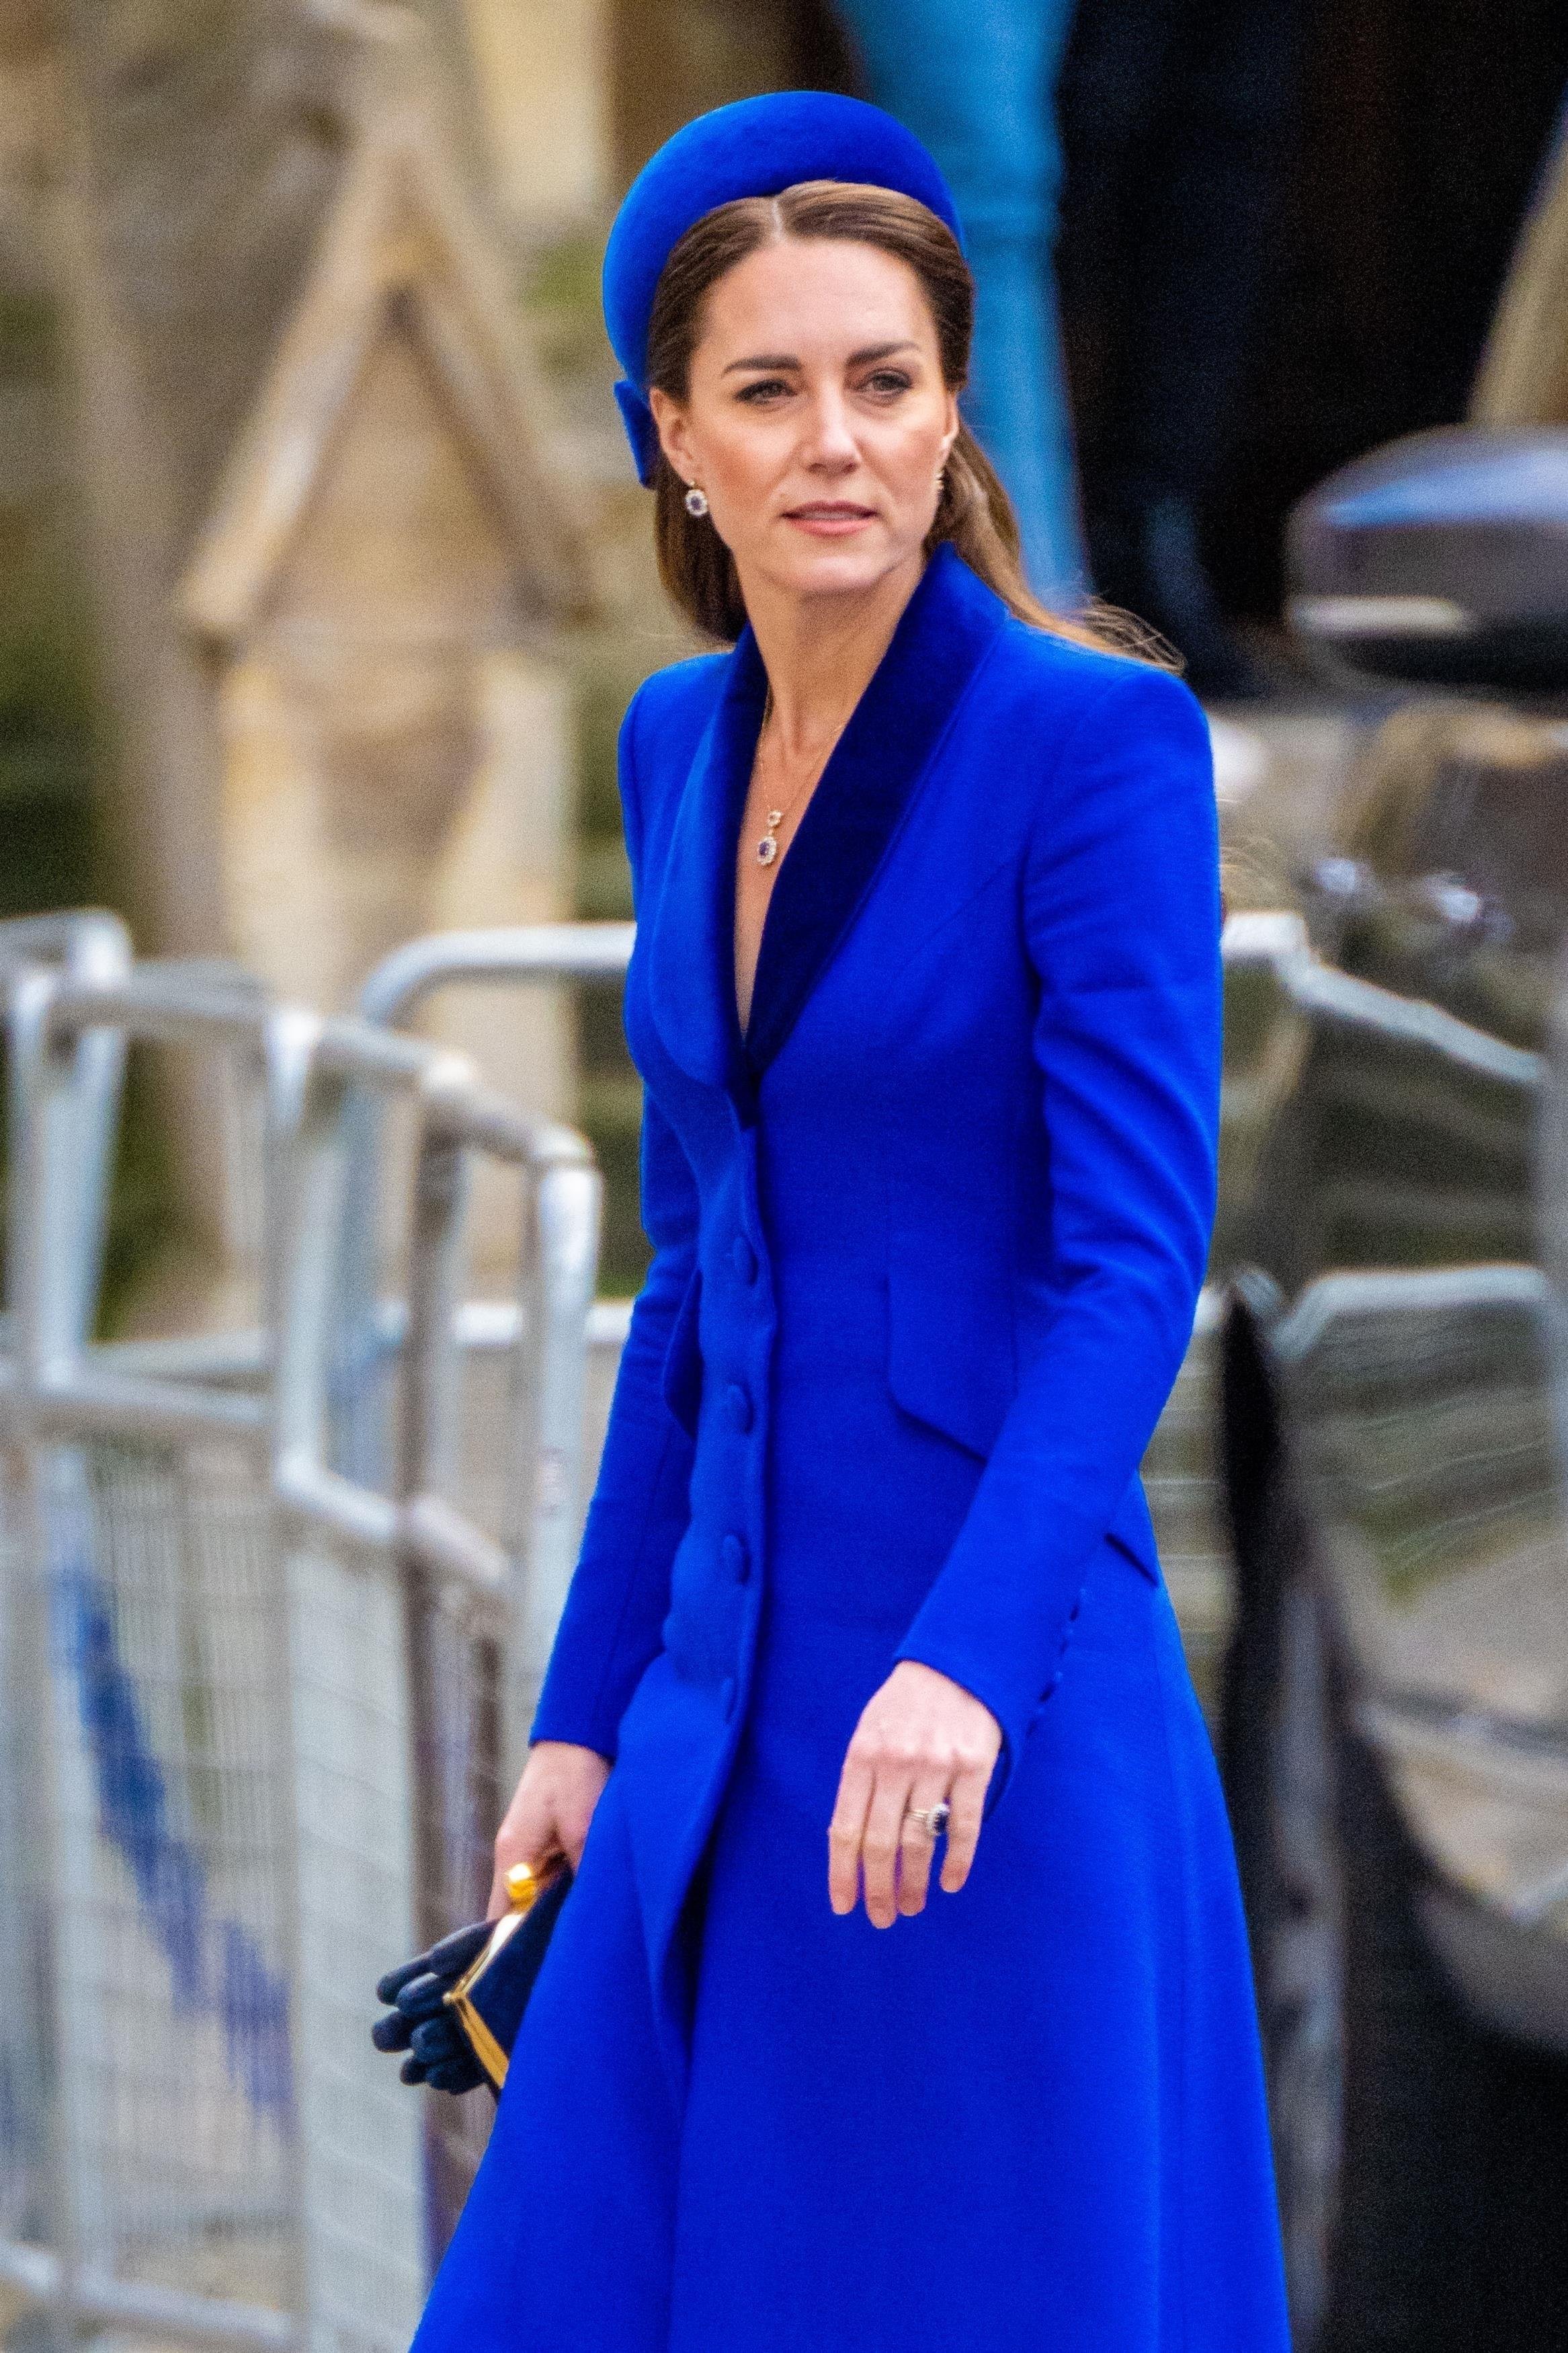 London, UNITED KINGDOM  - Catherine, Kate Middleton, Princess of Wales was admitted to The London Clinic yesterday for a planned abdominal surgery, which was successful, and it is expected that she will remain in the hospital for ten to fourteen days, before returning home to continue her recovery. Based on the current medical advice, she is unlikely to return to public duties until after Easter.